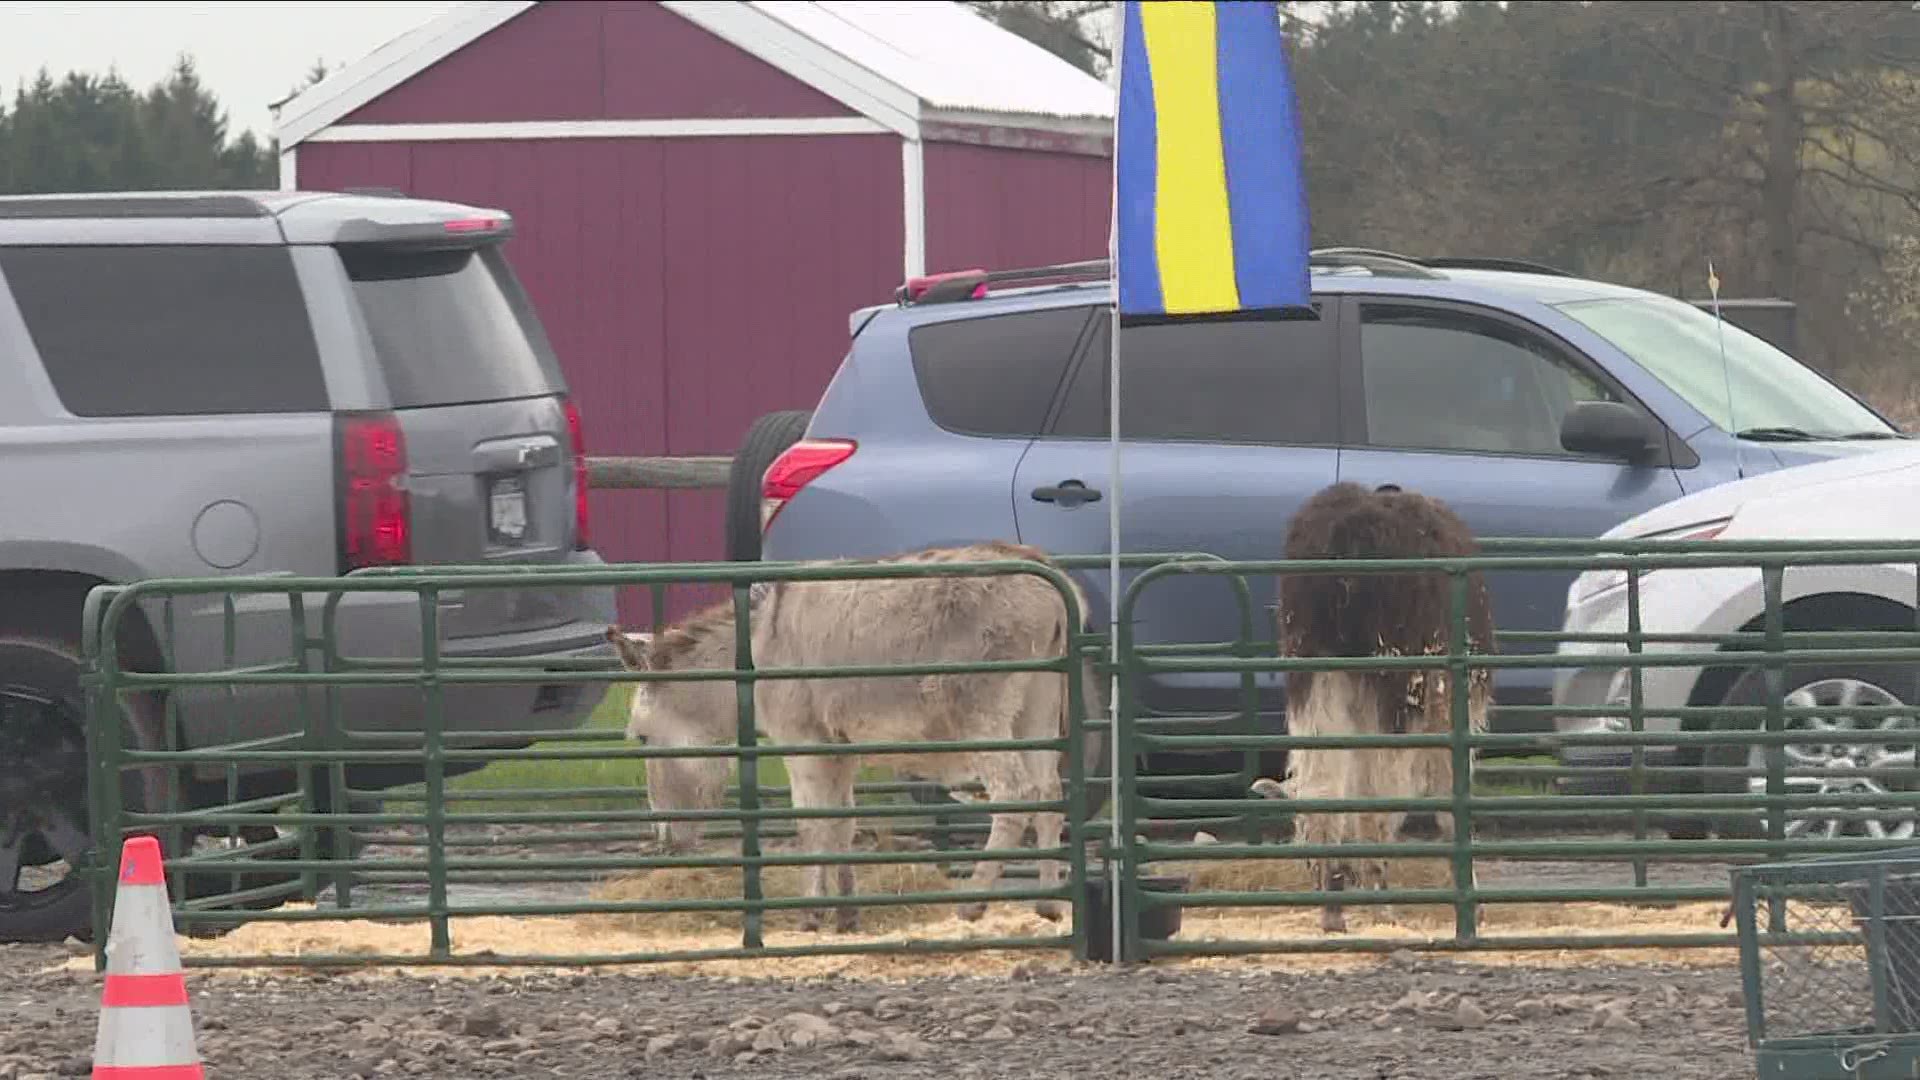 The drive thru zoo is being held Sunday at the Eden Corn Festival grounds.